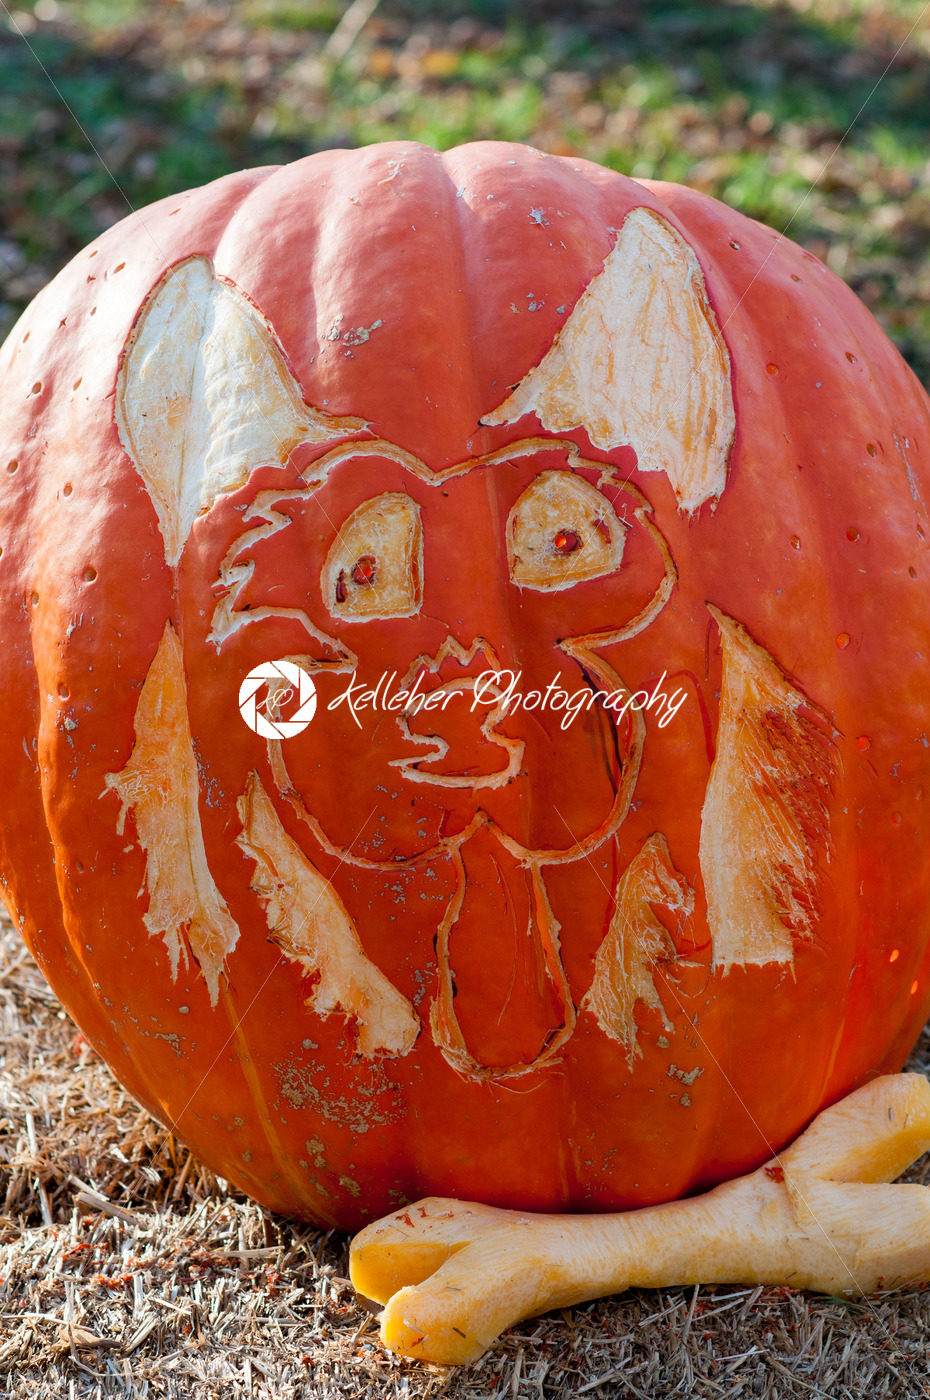 CHADDS FORD, PA – OCTOBER 26: Dog and Bone Pumpkin at The Great Pumpkin Carve carving contest on October 26, 2013 - Kelleher Photography Store